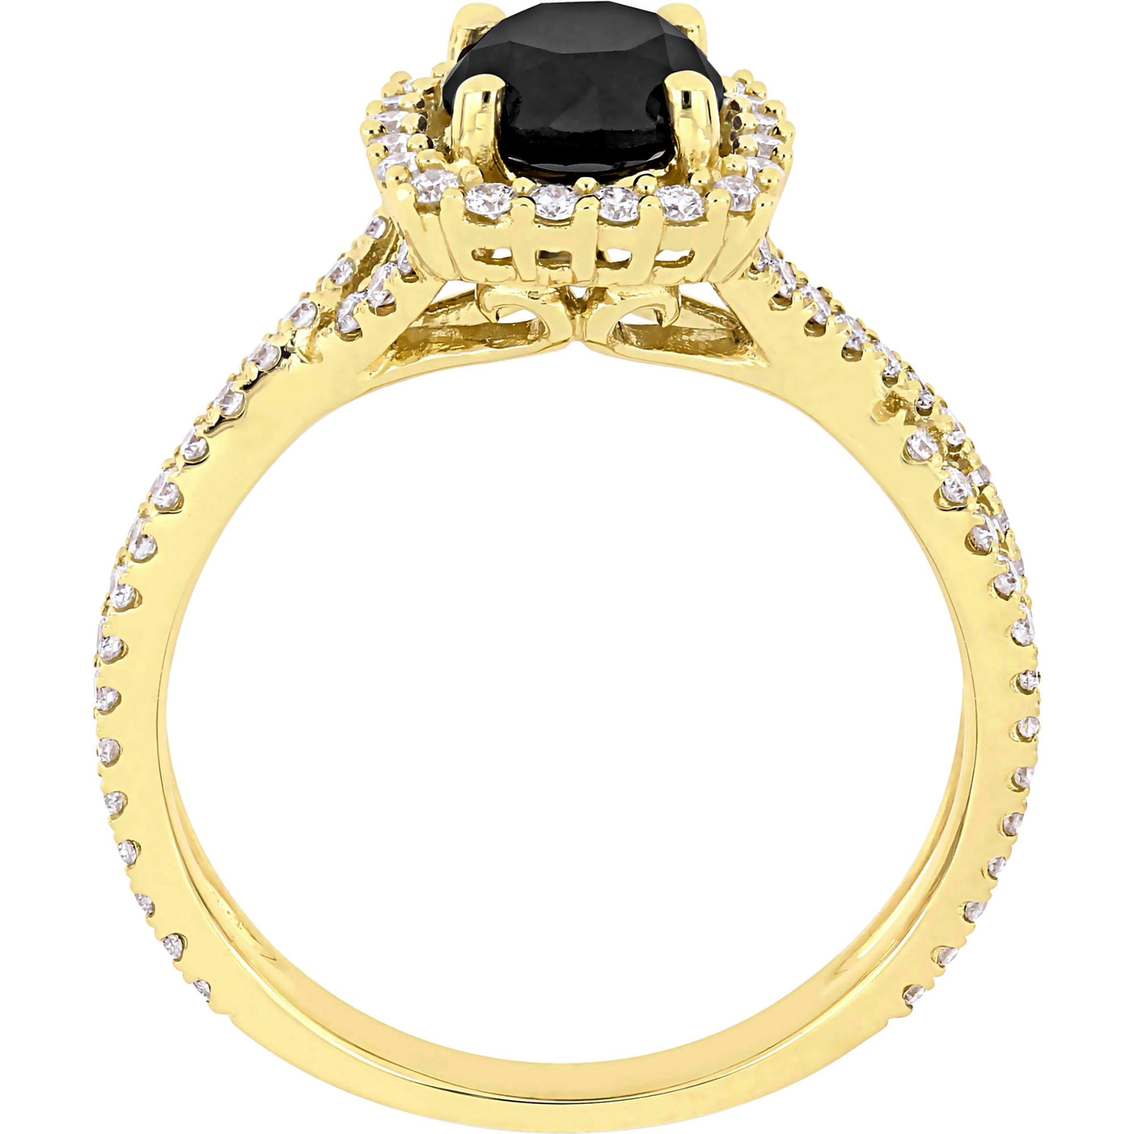 Diamore 14K Yellow Gold 1 1/2 CTW Black and White Diamond Halo Engagement Ring - Image 2 of 4